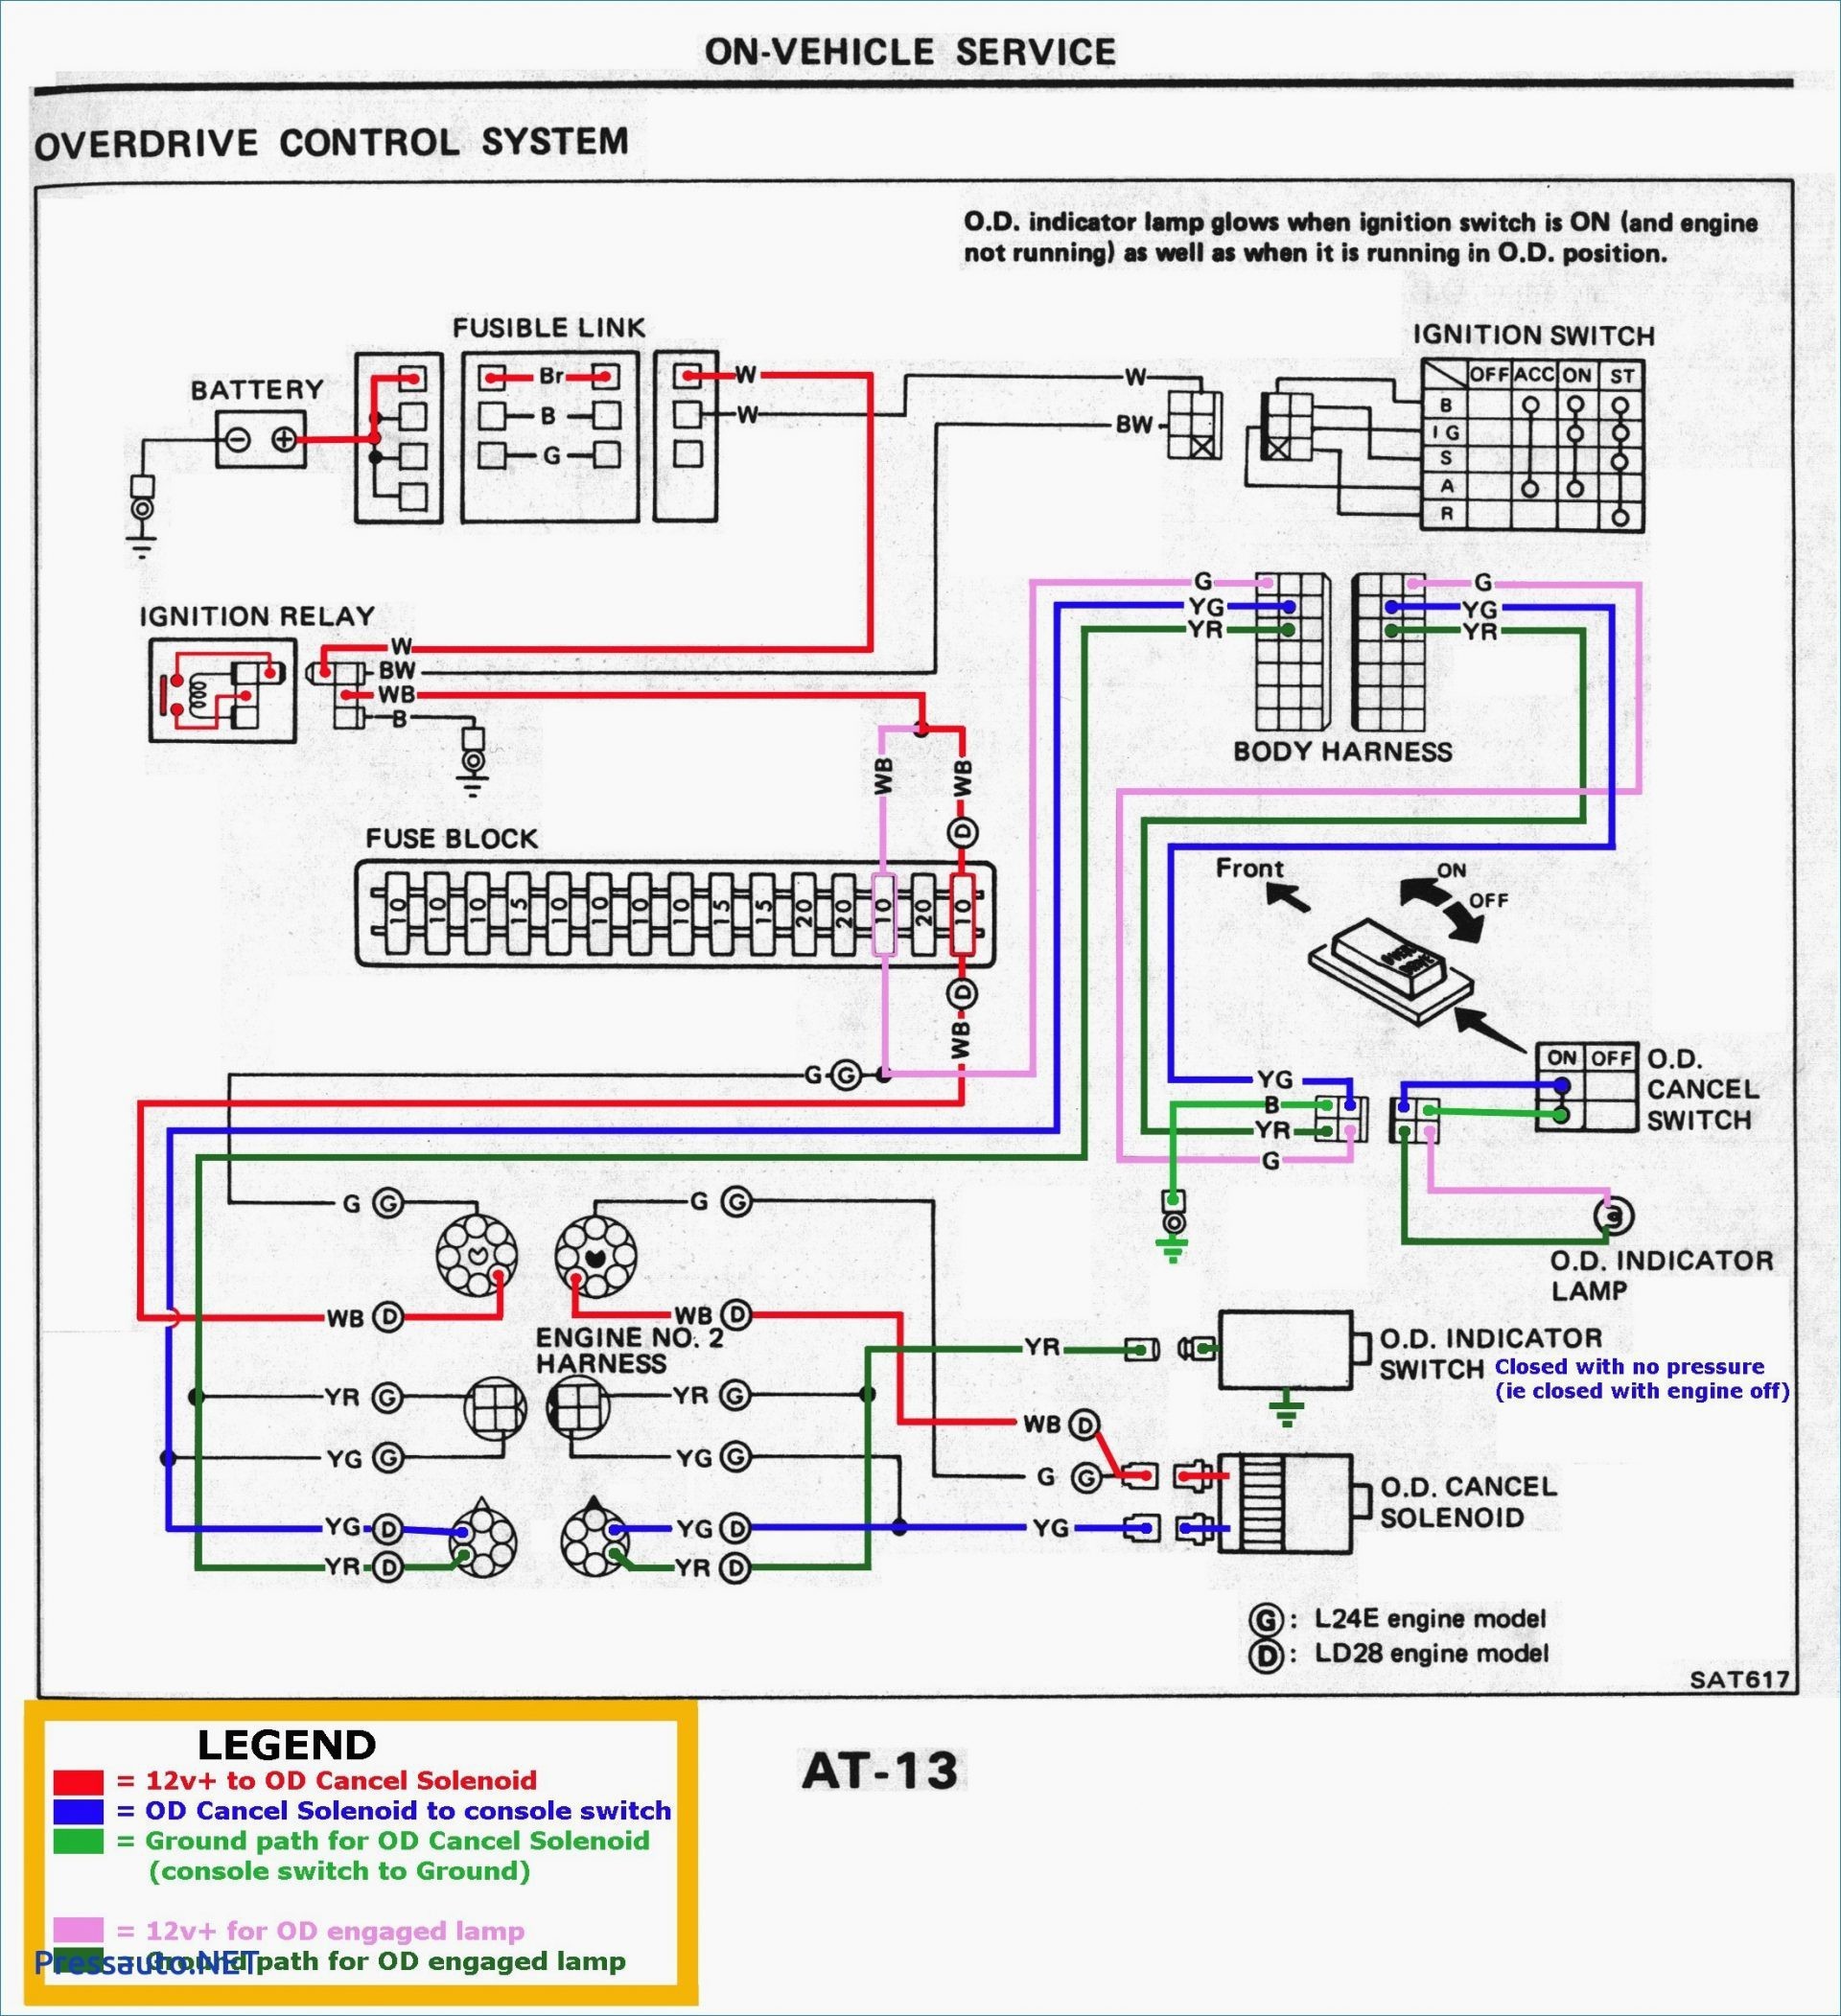 Wiring Diagram for Boat Lights 2018 Led Trailer Lights Wiring Diagram Collection